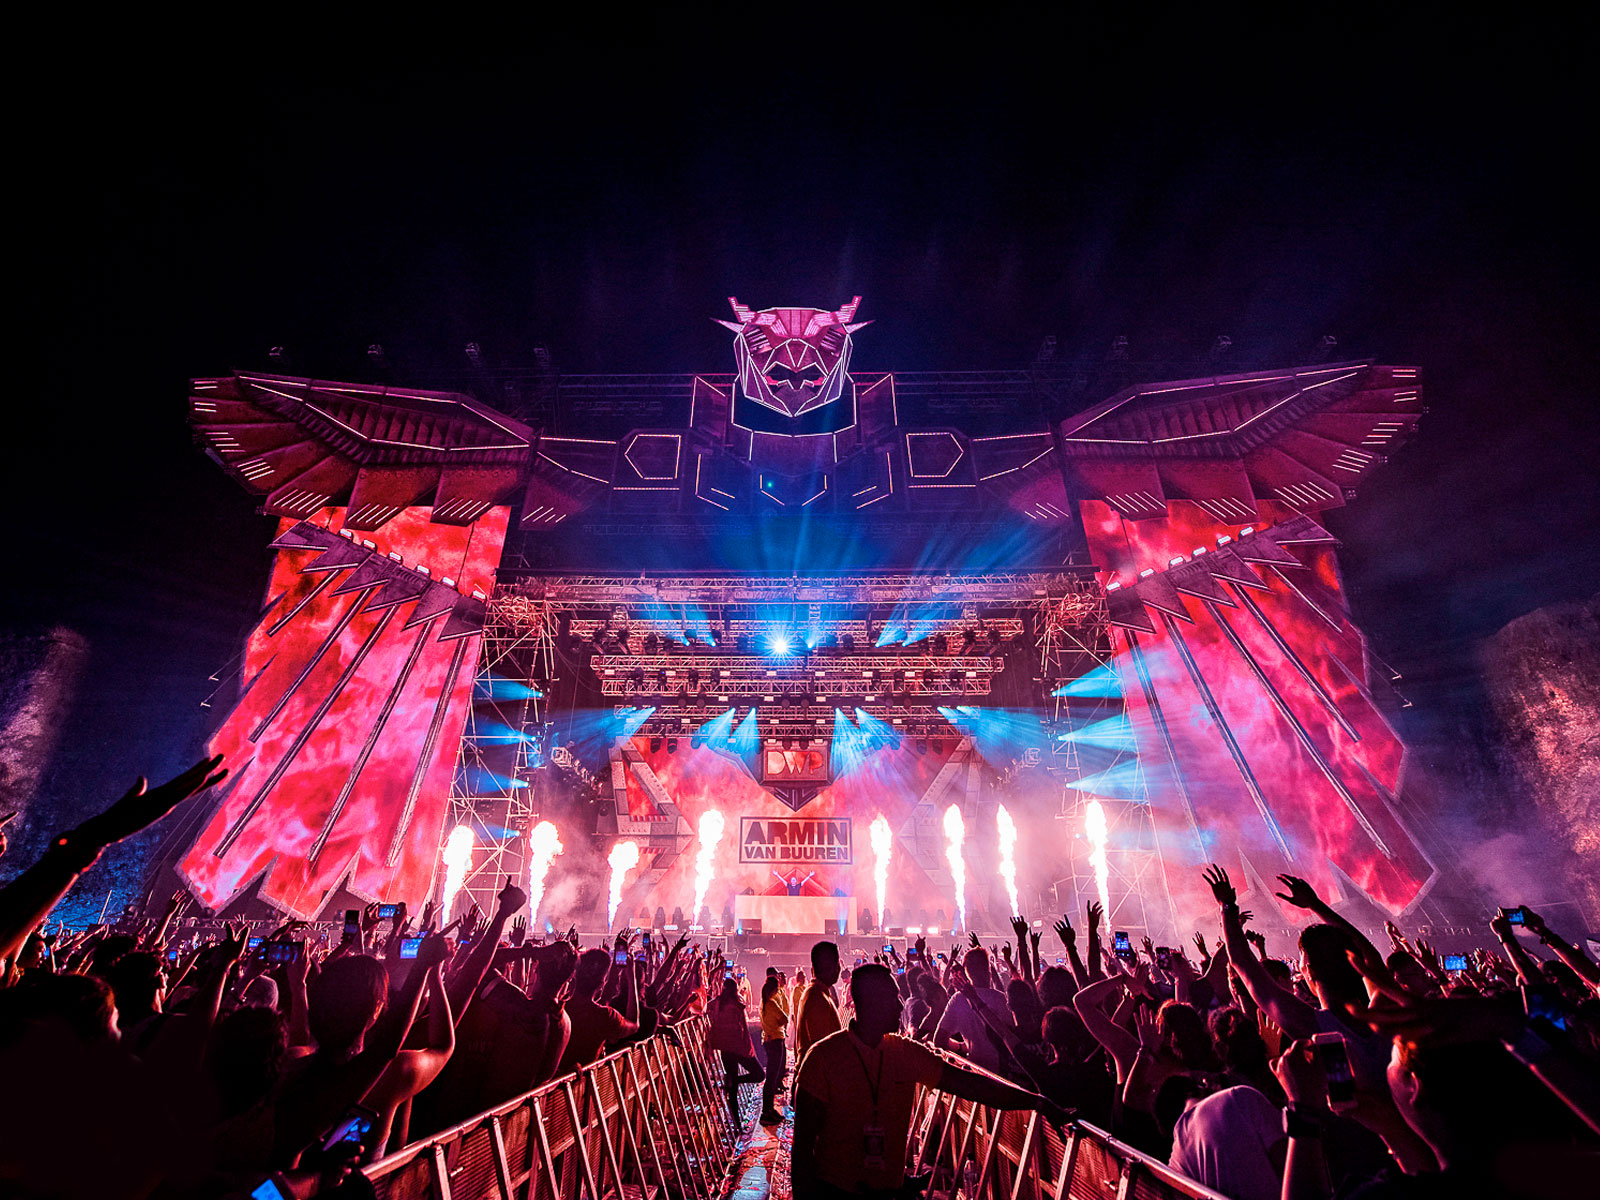 Djakarta Warehouse Project 2019 Phase 1 Lineup Announced | OZ EDM